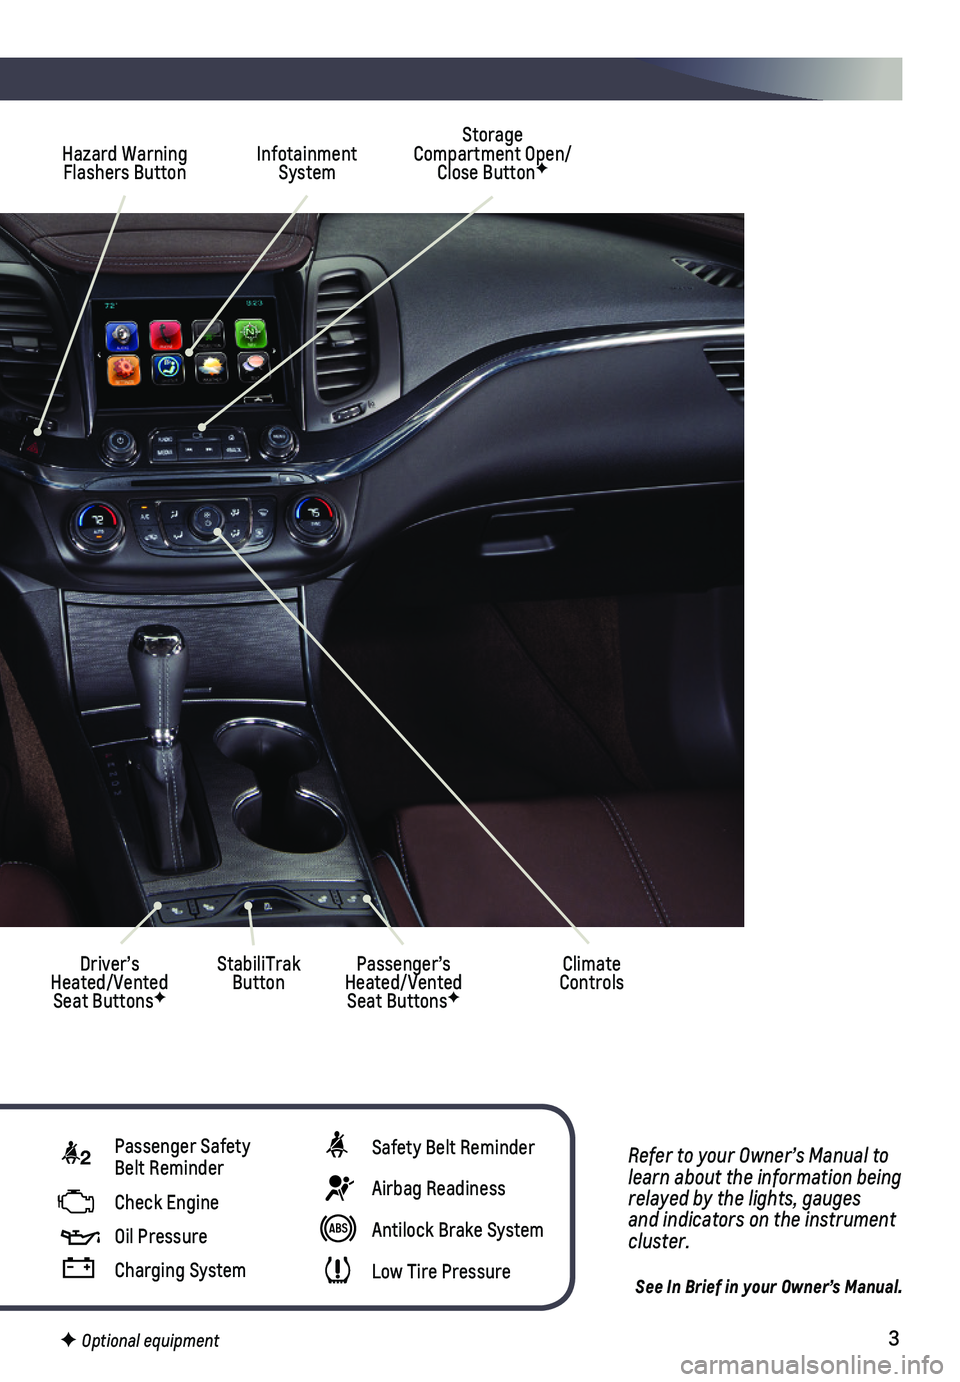 CHEVROLET IMPALA 2018  Get To Know Guide 3
Refer to your Owner’s Manual to learn about the information being relayed by the lights, gauges and indicators on the instrument cluster.
See In Brief in your Owner’s Manual.
Hazard Warning Flas